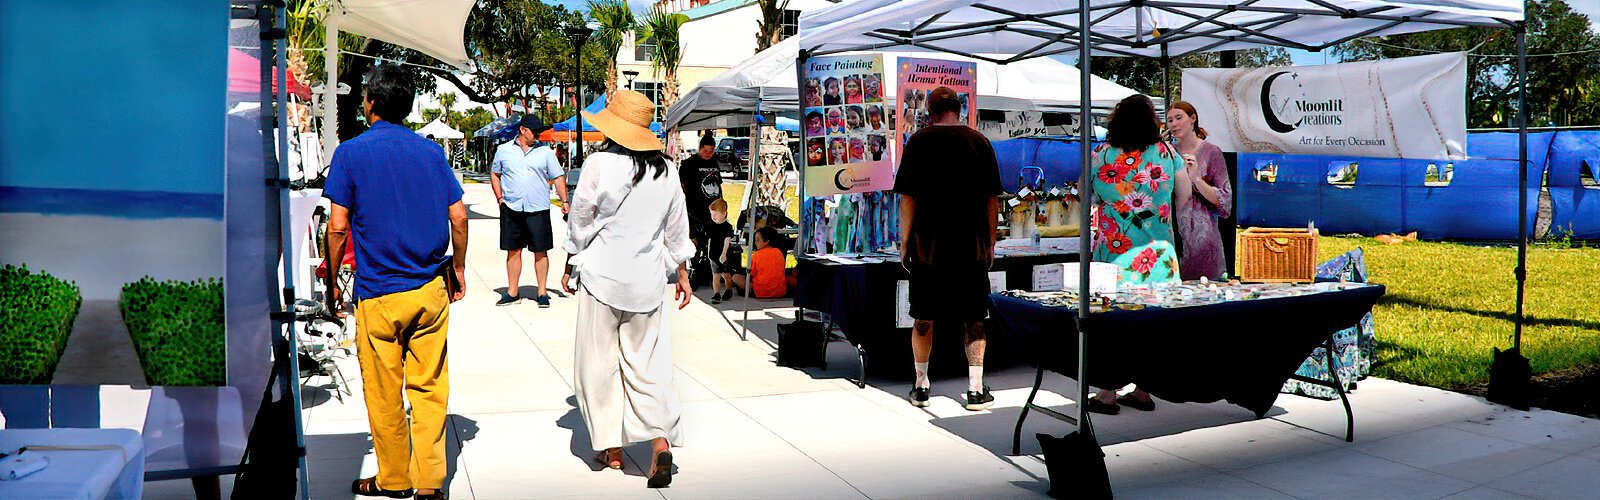 In addition to murals, the artwork and products of local artists and vendors were displayed to catch the visitors’ fancy at the inaugural Art in the Park event at Clearwater's Coachman Park.